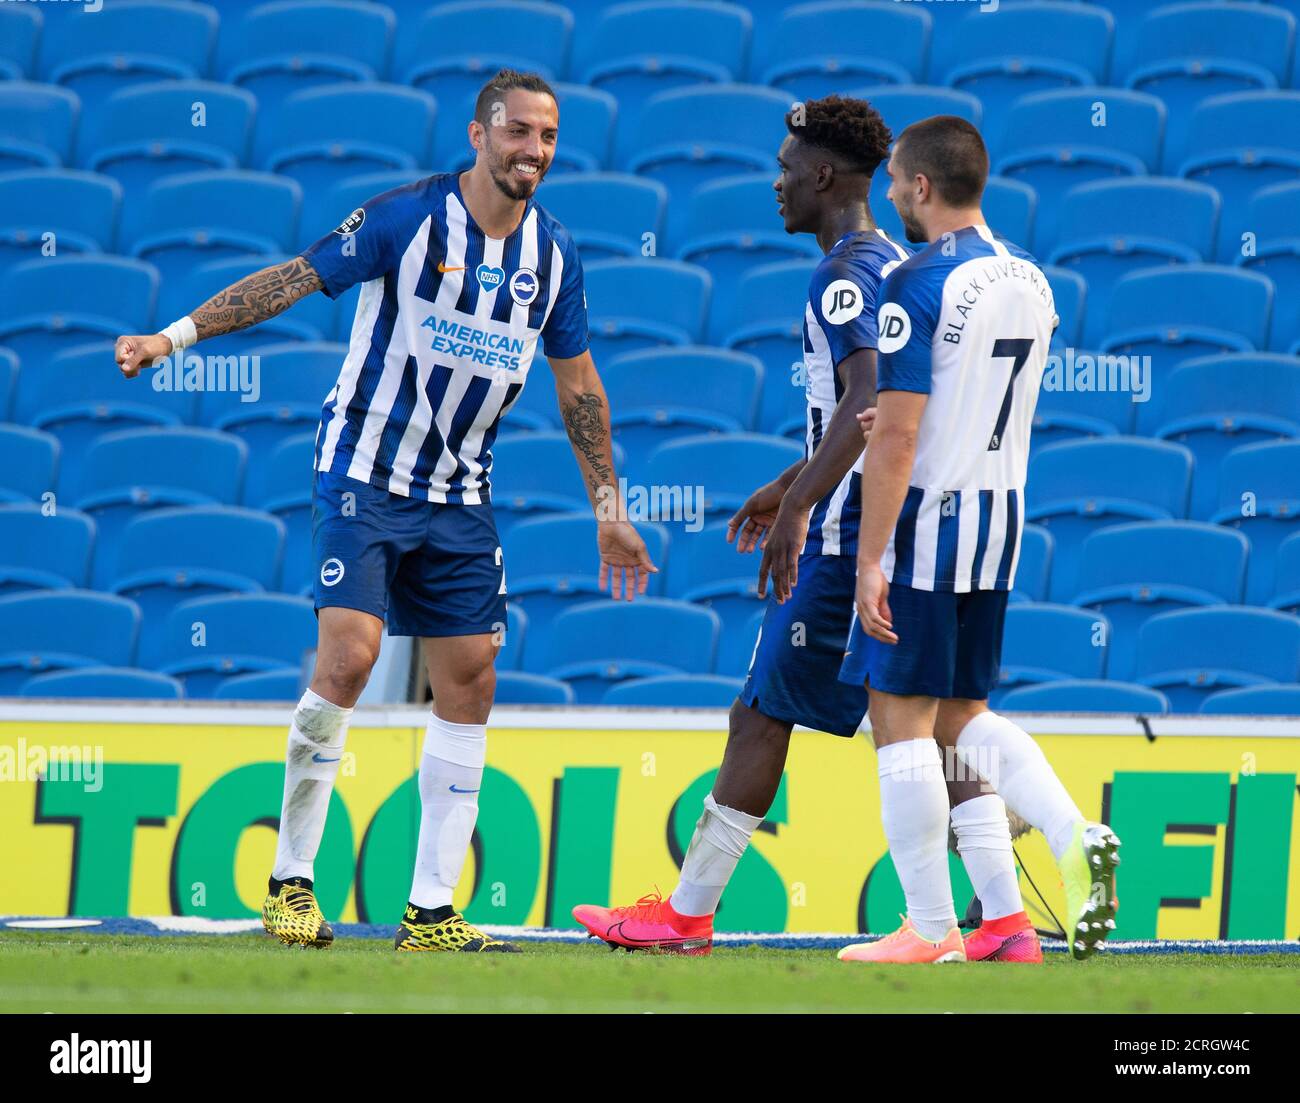 Neal Maupay celebrates scoring the winning goal for Brighton during the Premier League match at the AMEX Stadium, Brighton.   PHOTO CREDIT : © MARK PA Stock Photo